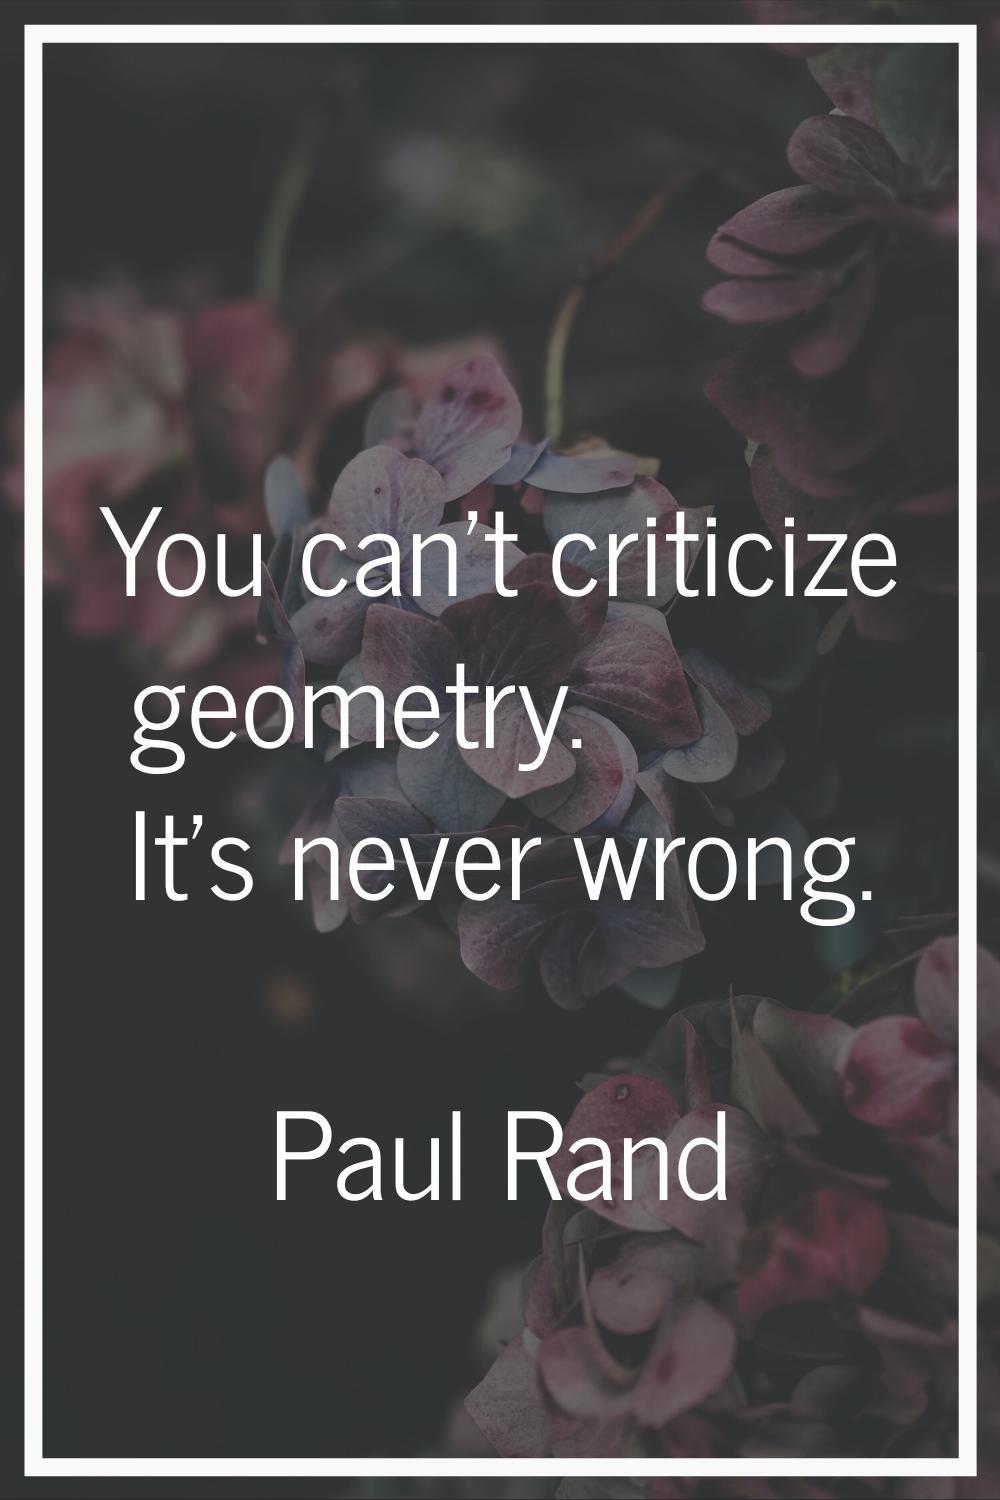 You can't criticize geometry. It's never wrong.